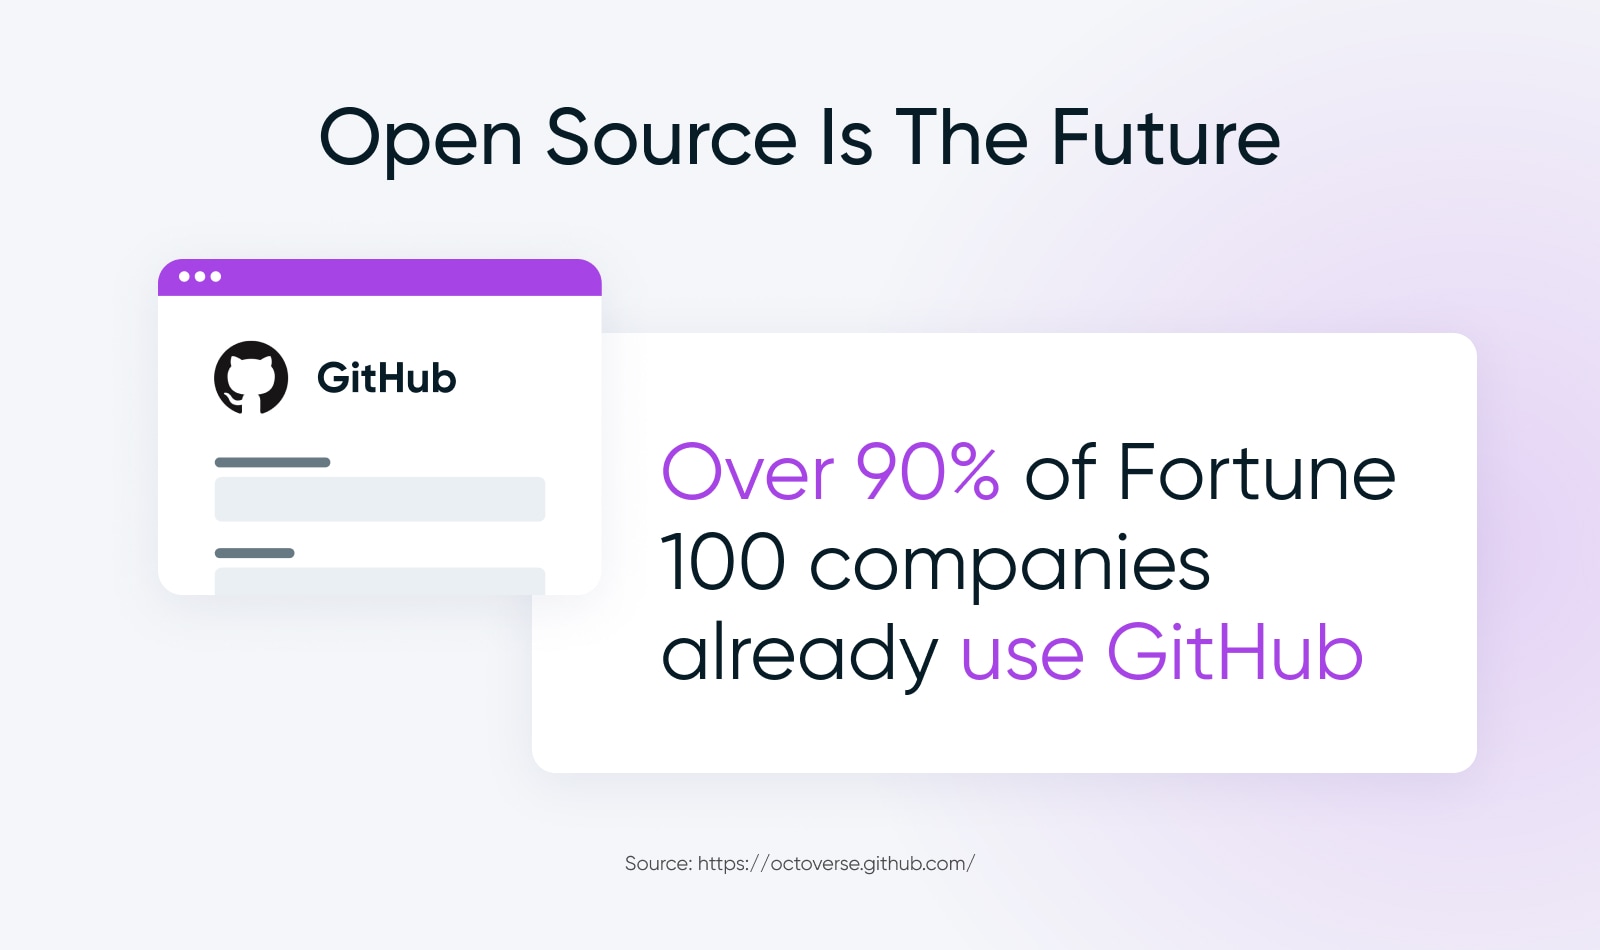 Over 90% of Fortune 100 companies already use GitHub